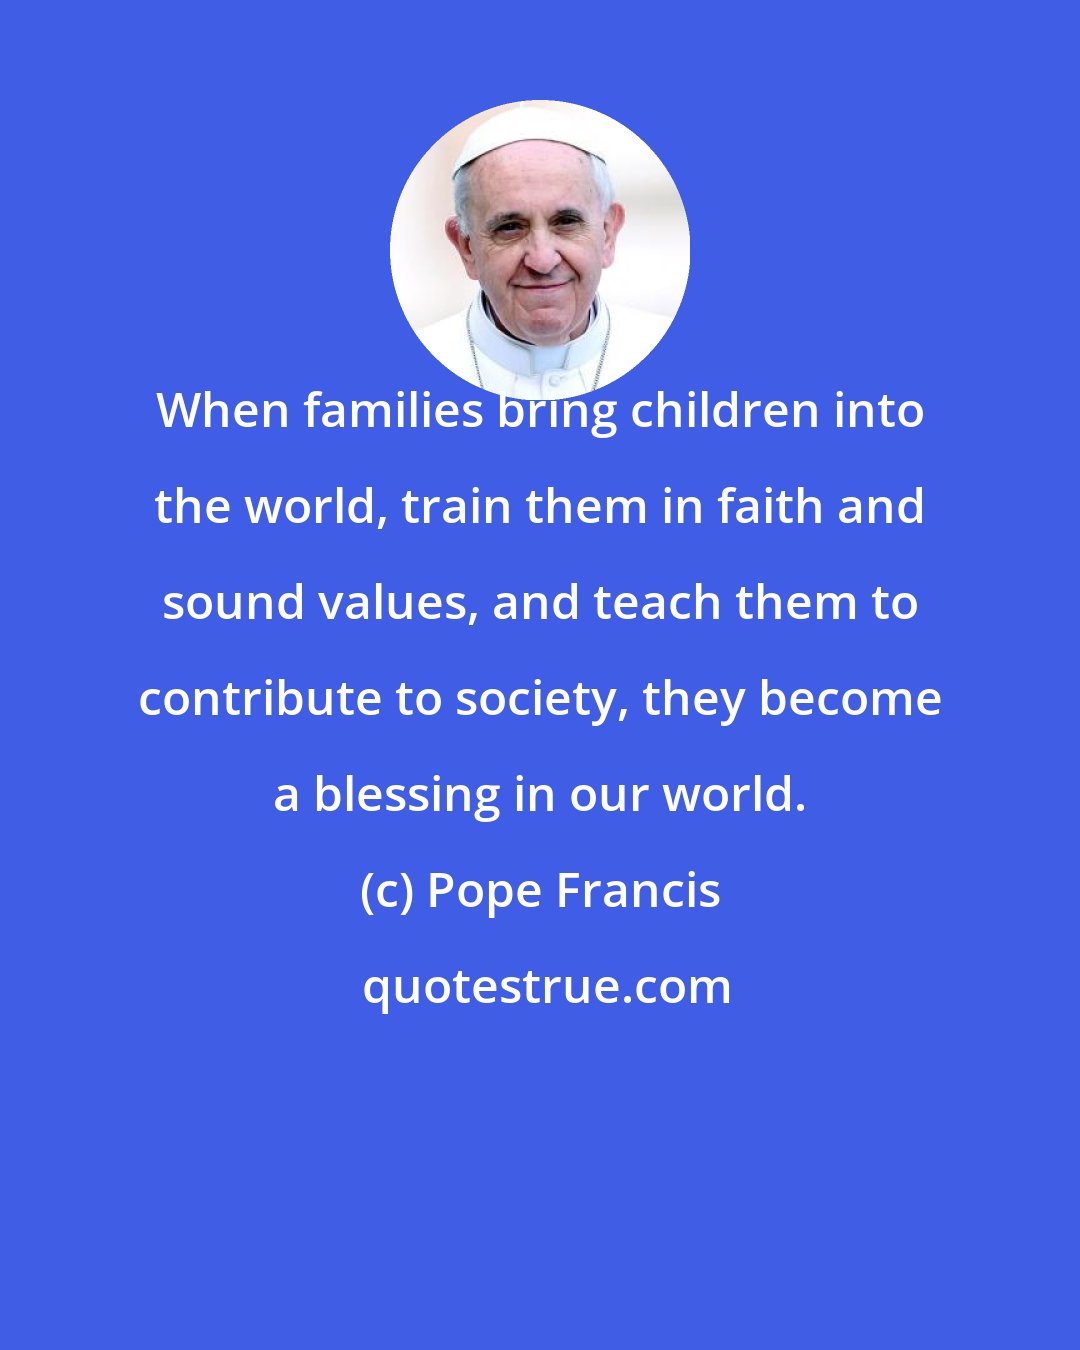 Pope Francis: When families bring children into the world, train them in faith and sound values, and teach them to contribute to society, they become a blessing in our world.